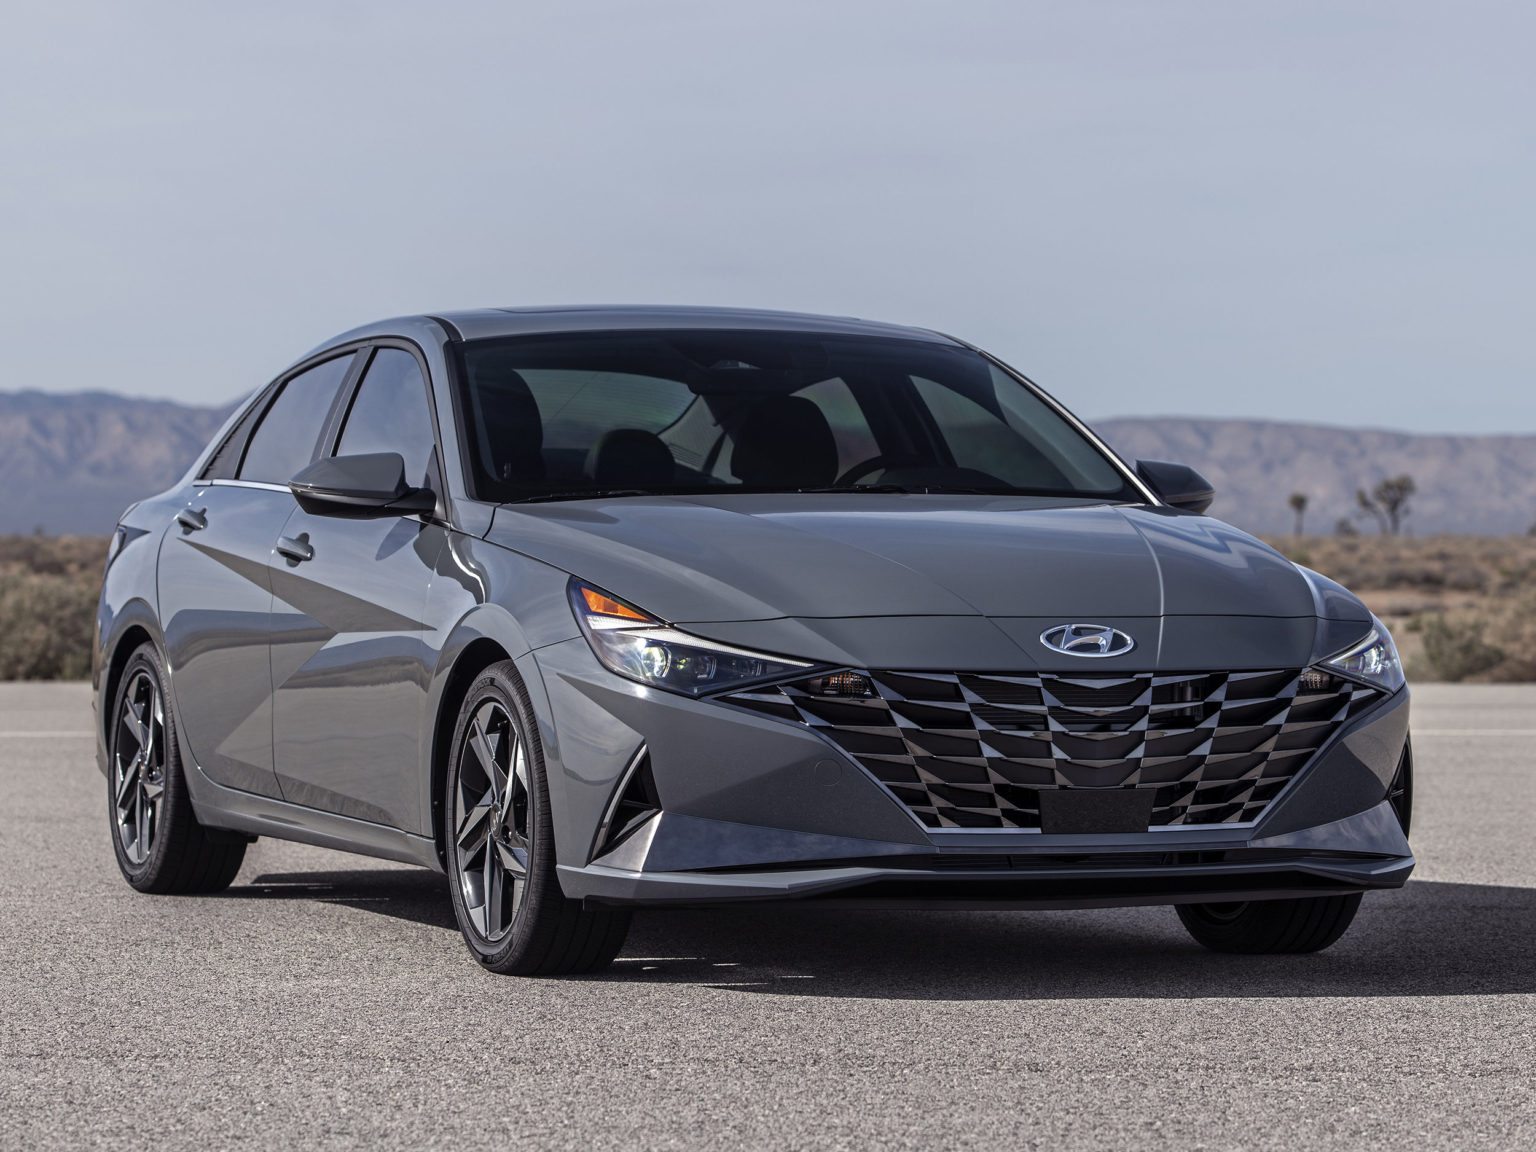 The 2021 Hyundai Elantra lineup includes two versions of the Elantra Hybrid.